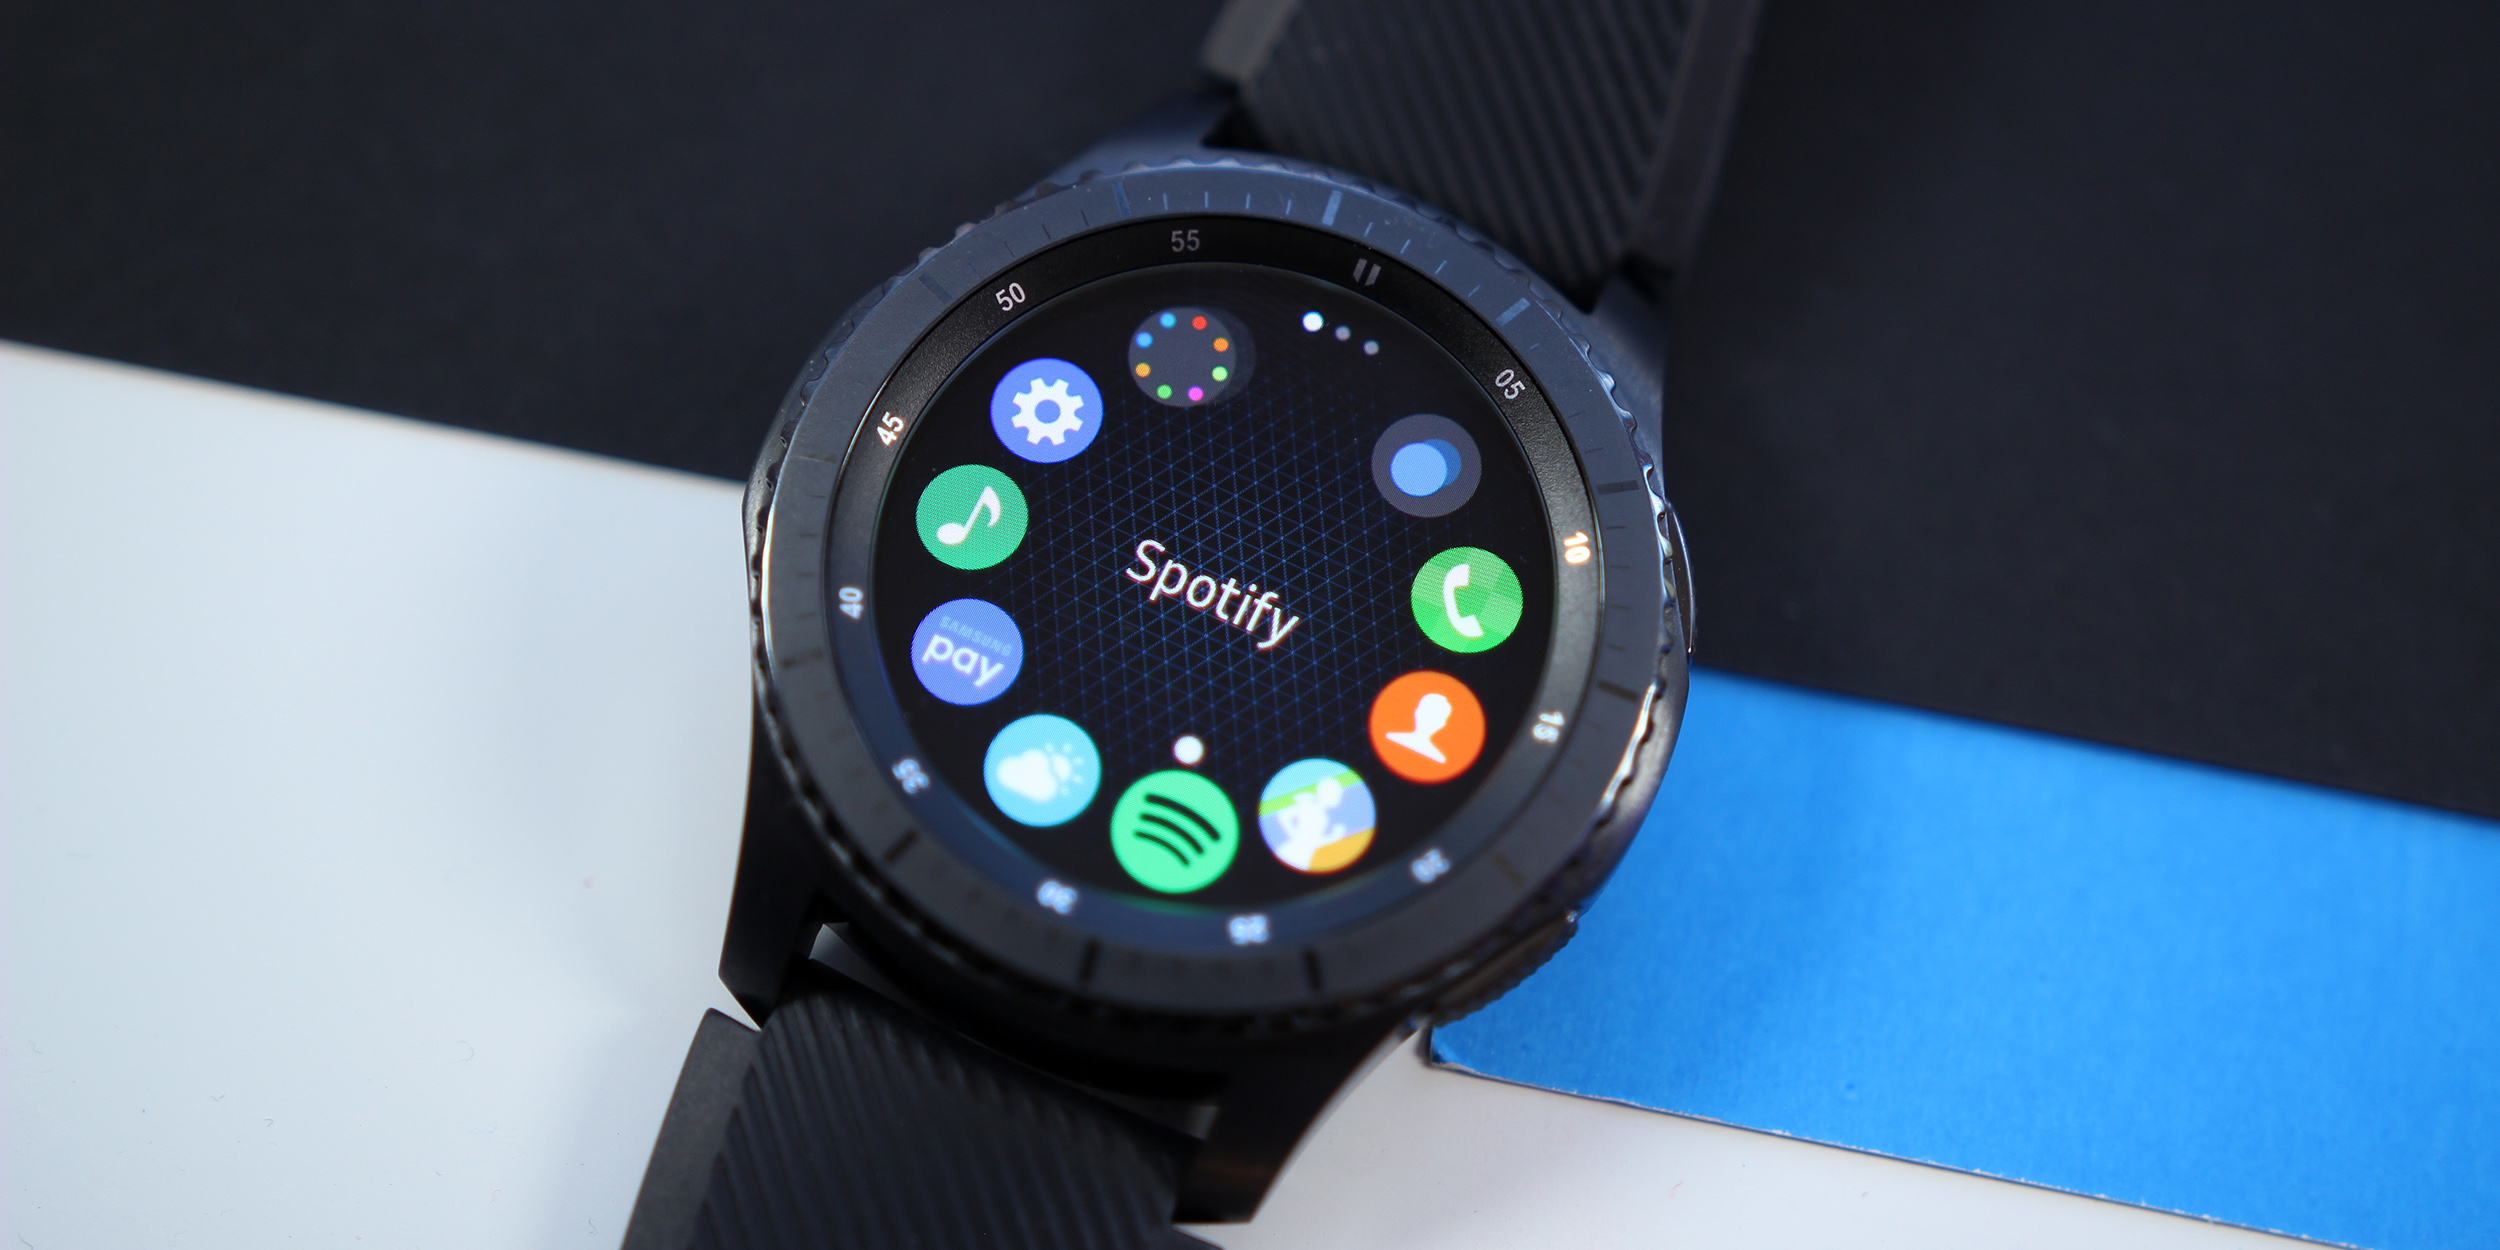 Samsung Gear S3 Review This is the smartwatch of the future we’ve been